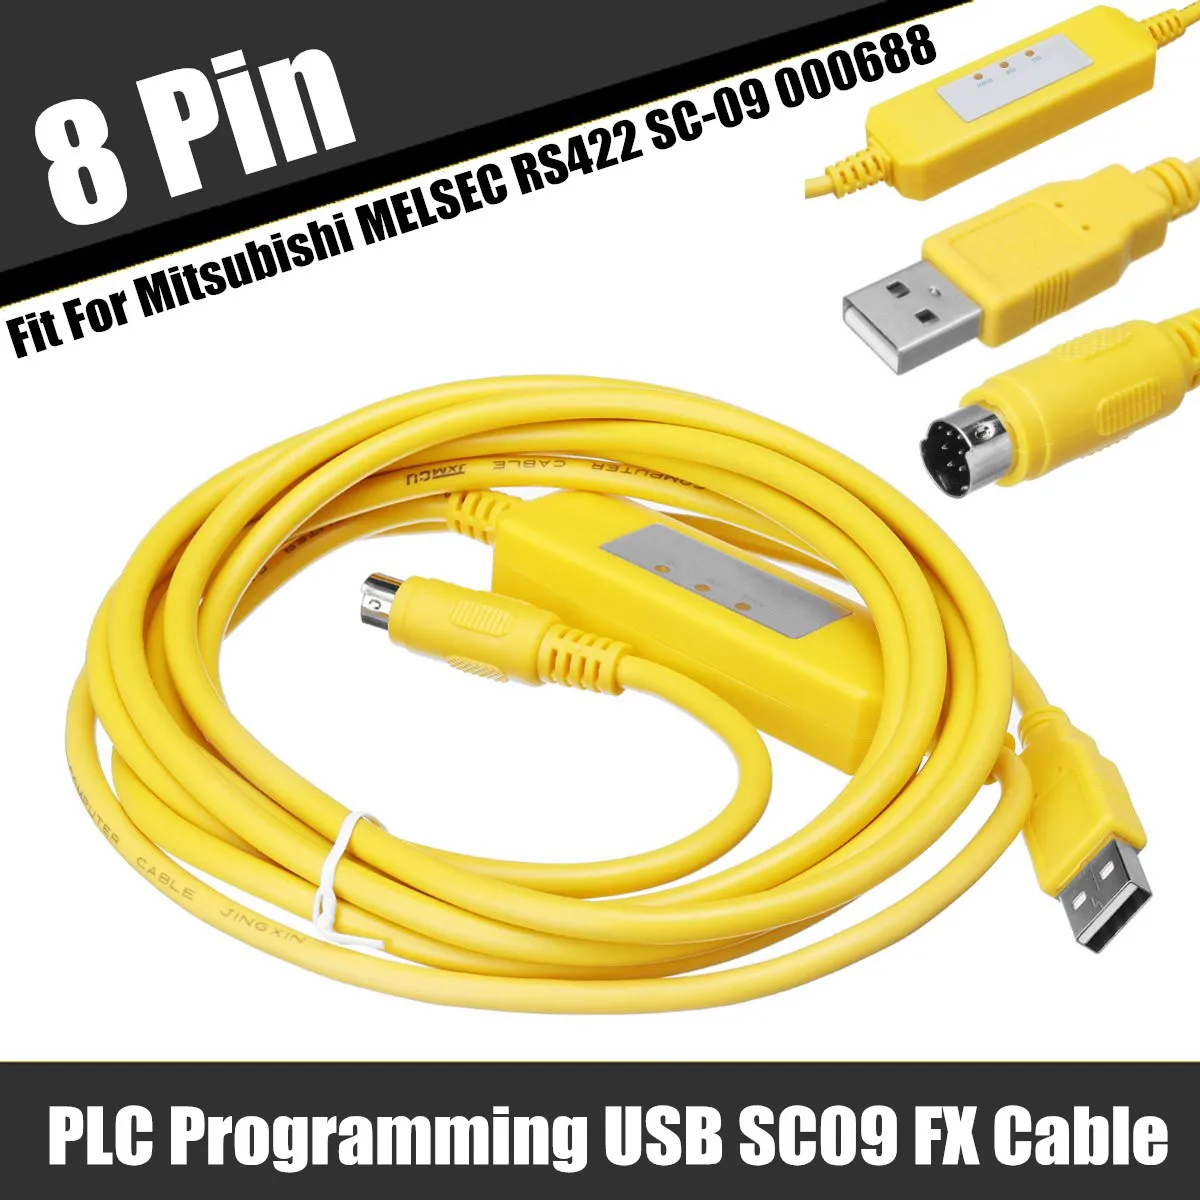 

PLC Programming USB-SC09-FX Cable 8 Pin For Mitsubishi MELSEC RS422 SC-09 000688 With Communication Indicator Newest